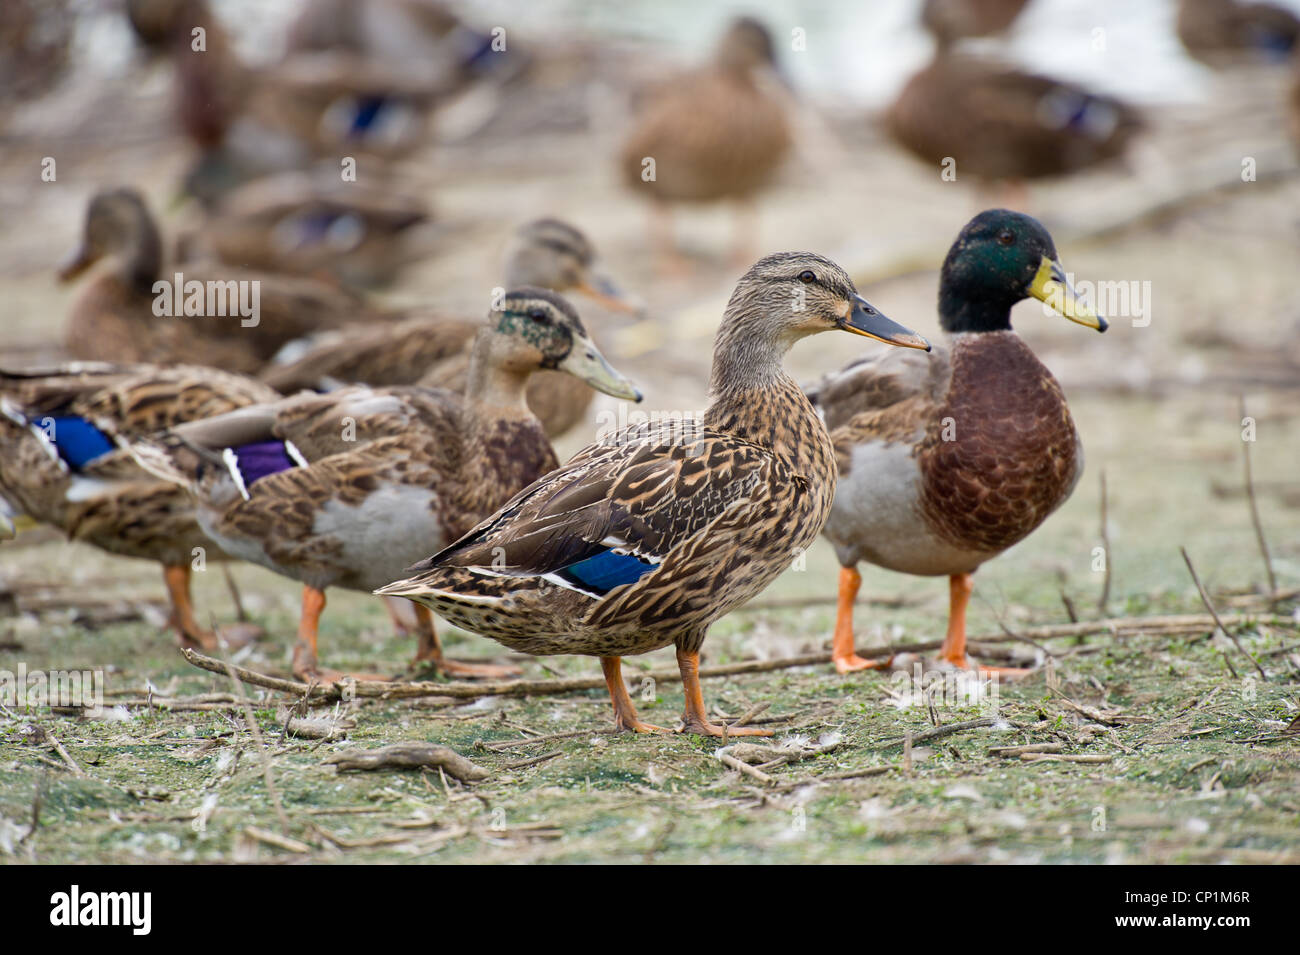 Pond with crop of ducks for duck hunting Stock Photo